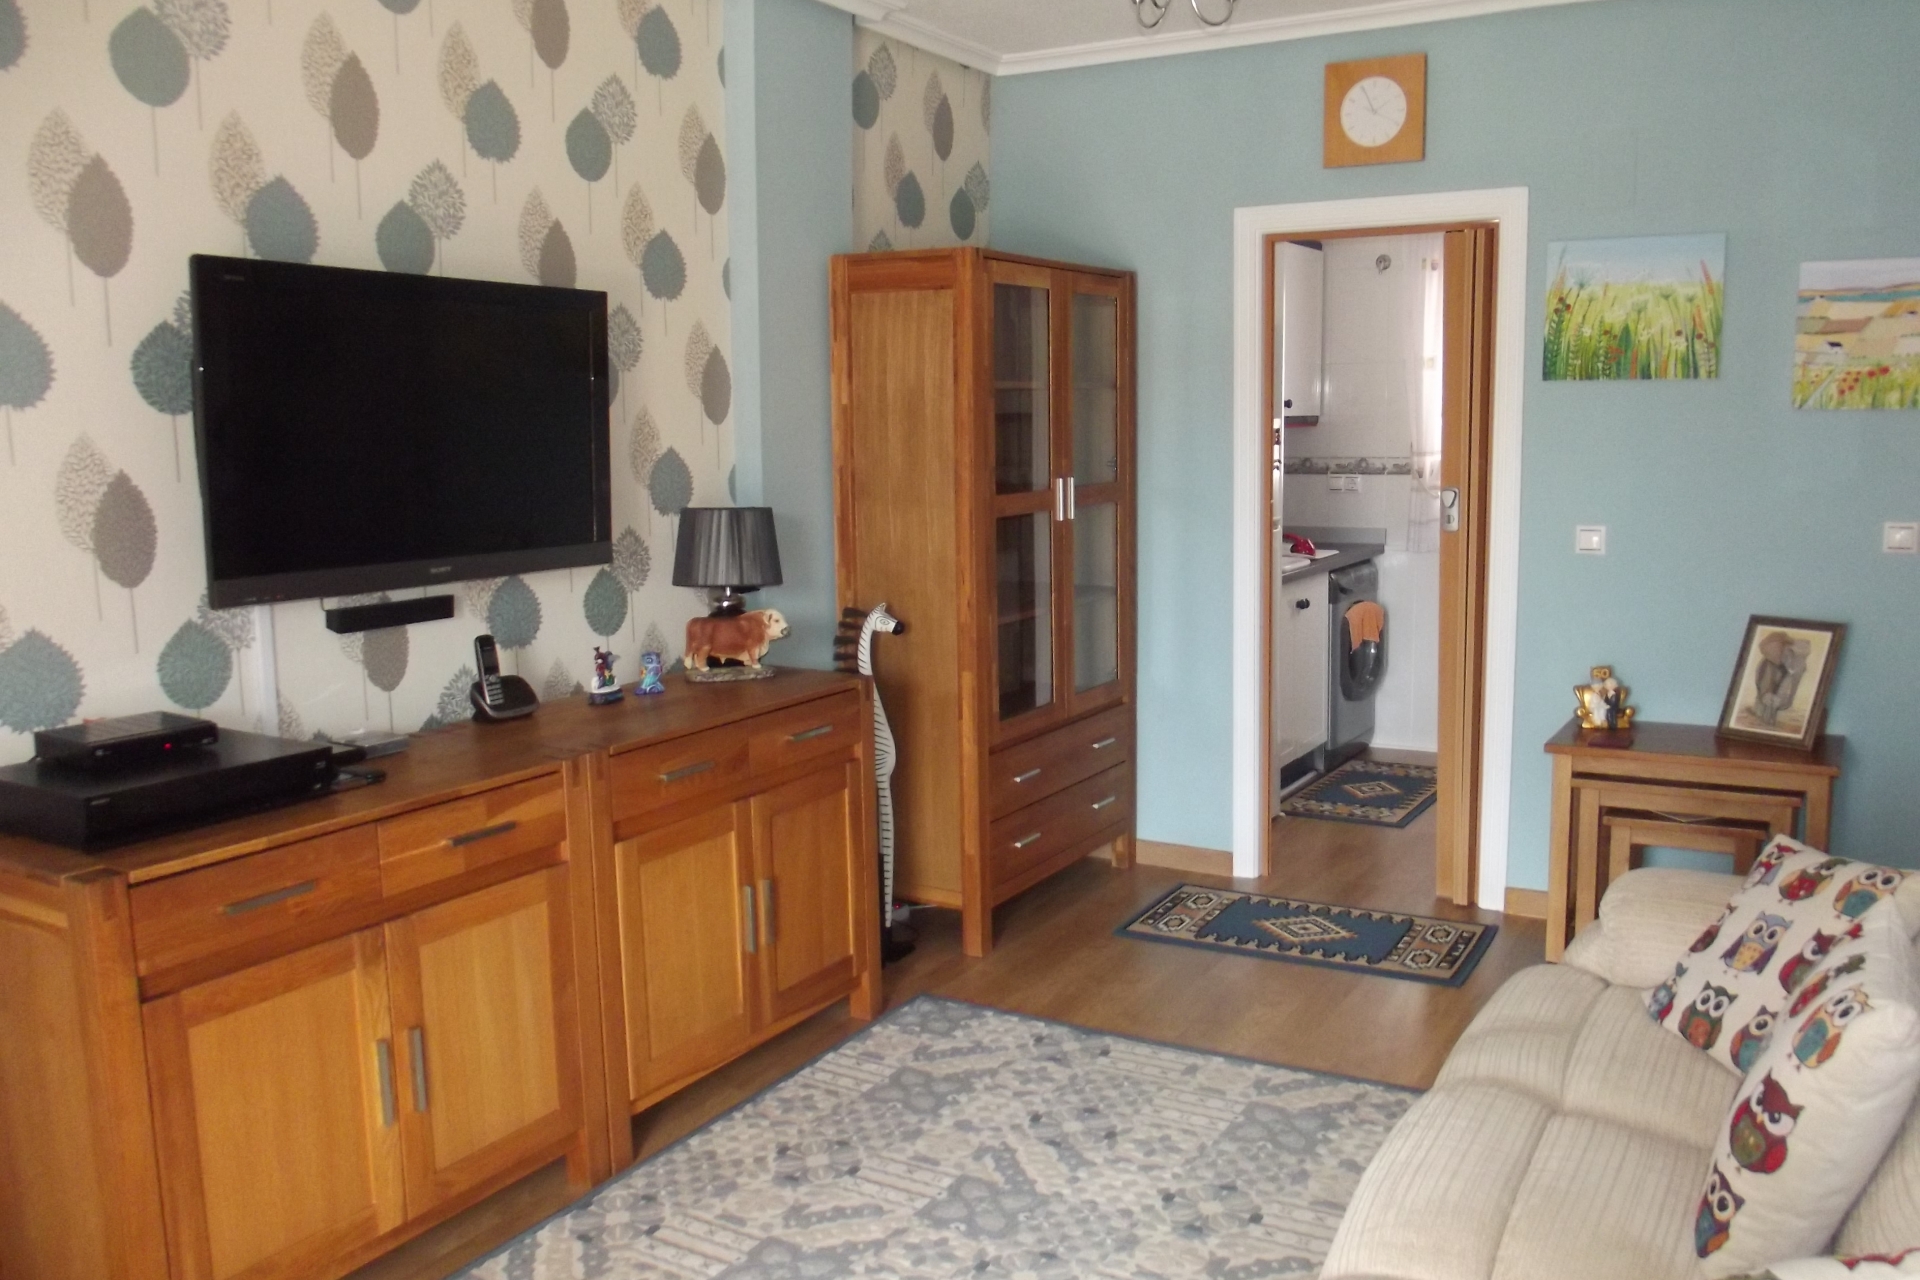 Property Sold - Bungalow for sale - Orihuela Costa - Dream Hills